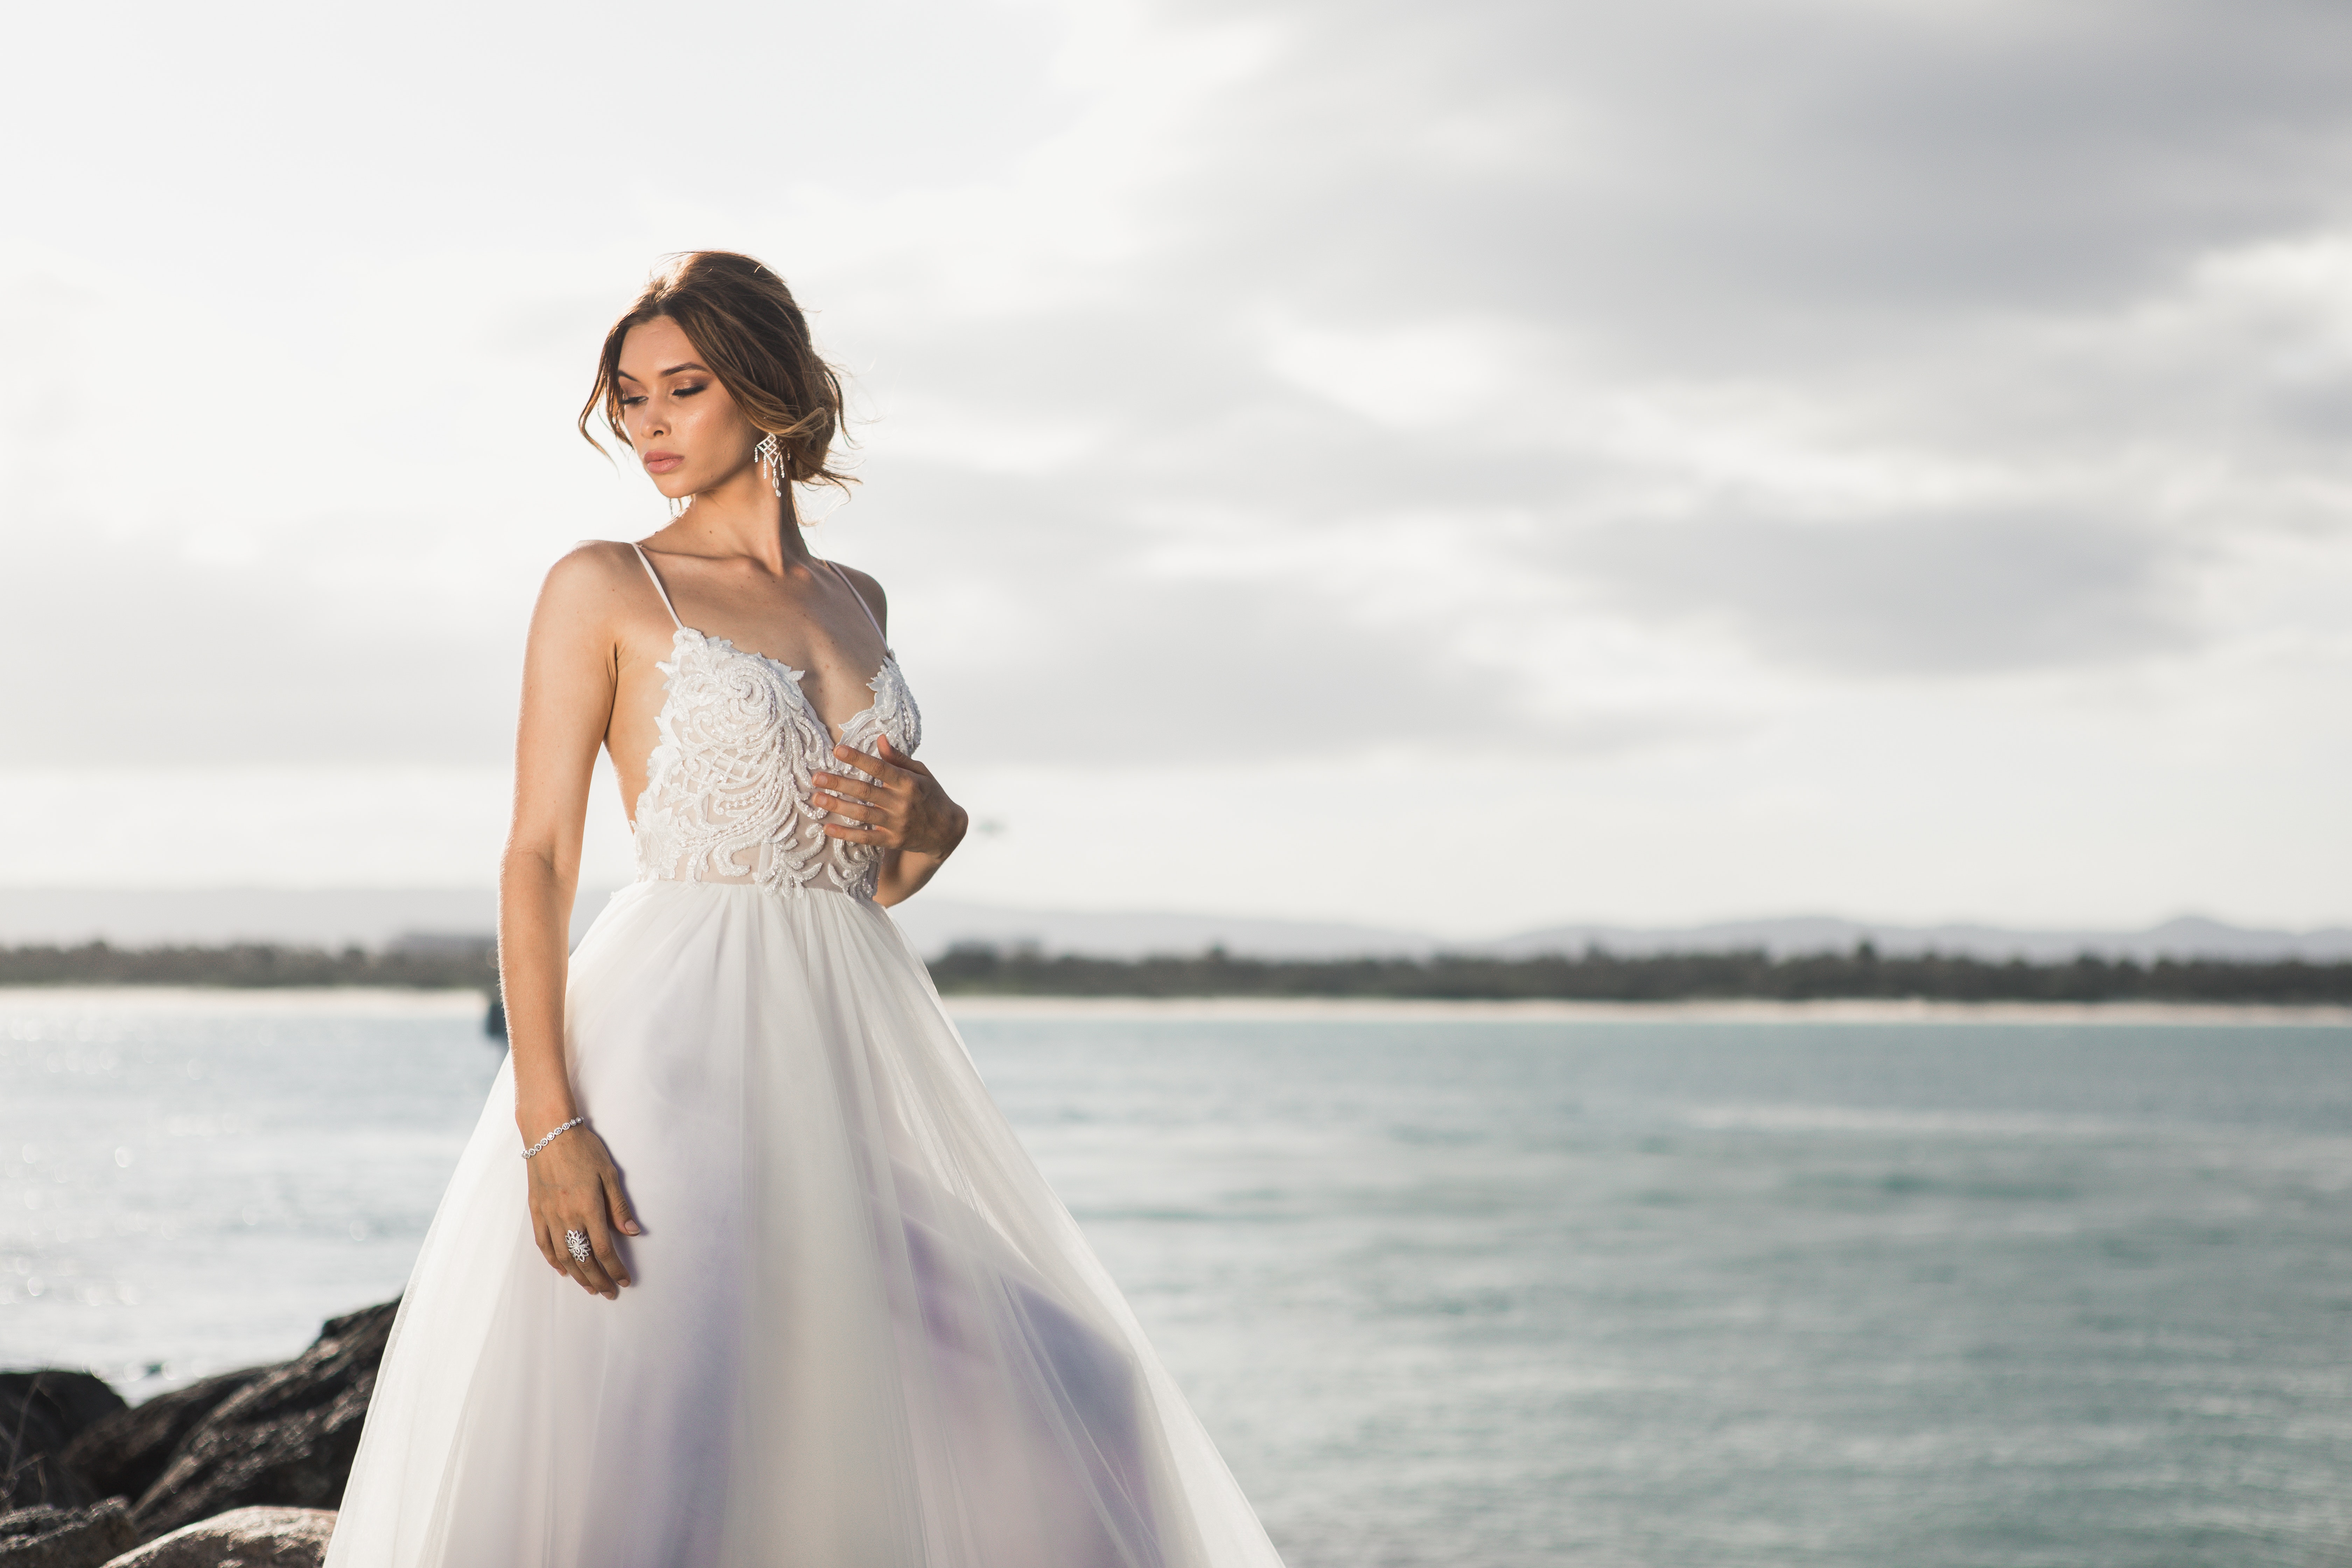 elegant bride standing at the edge of a body of water